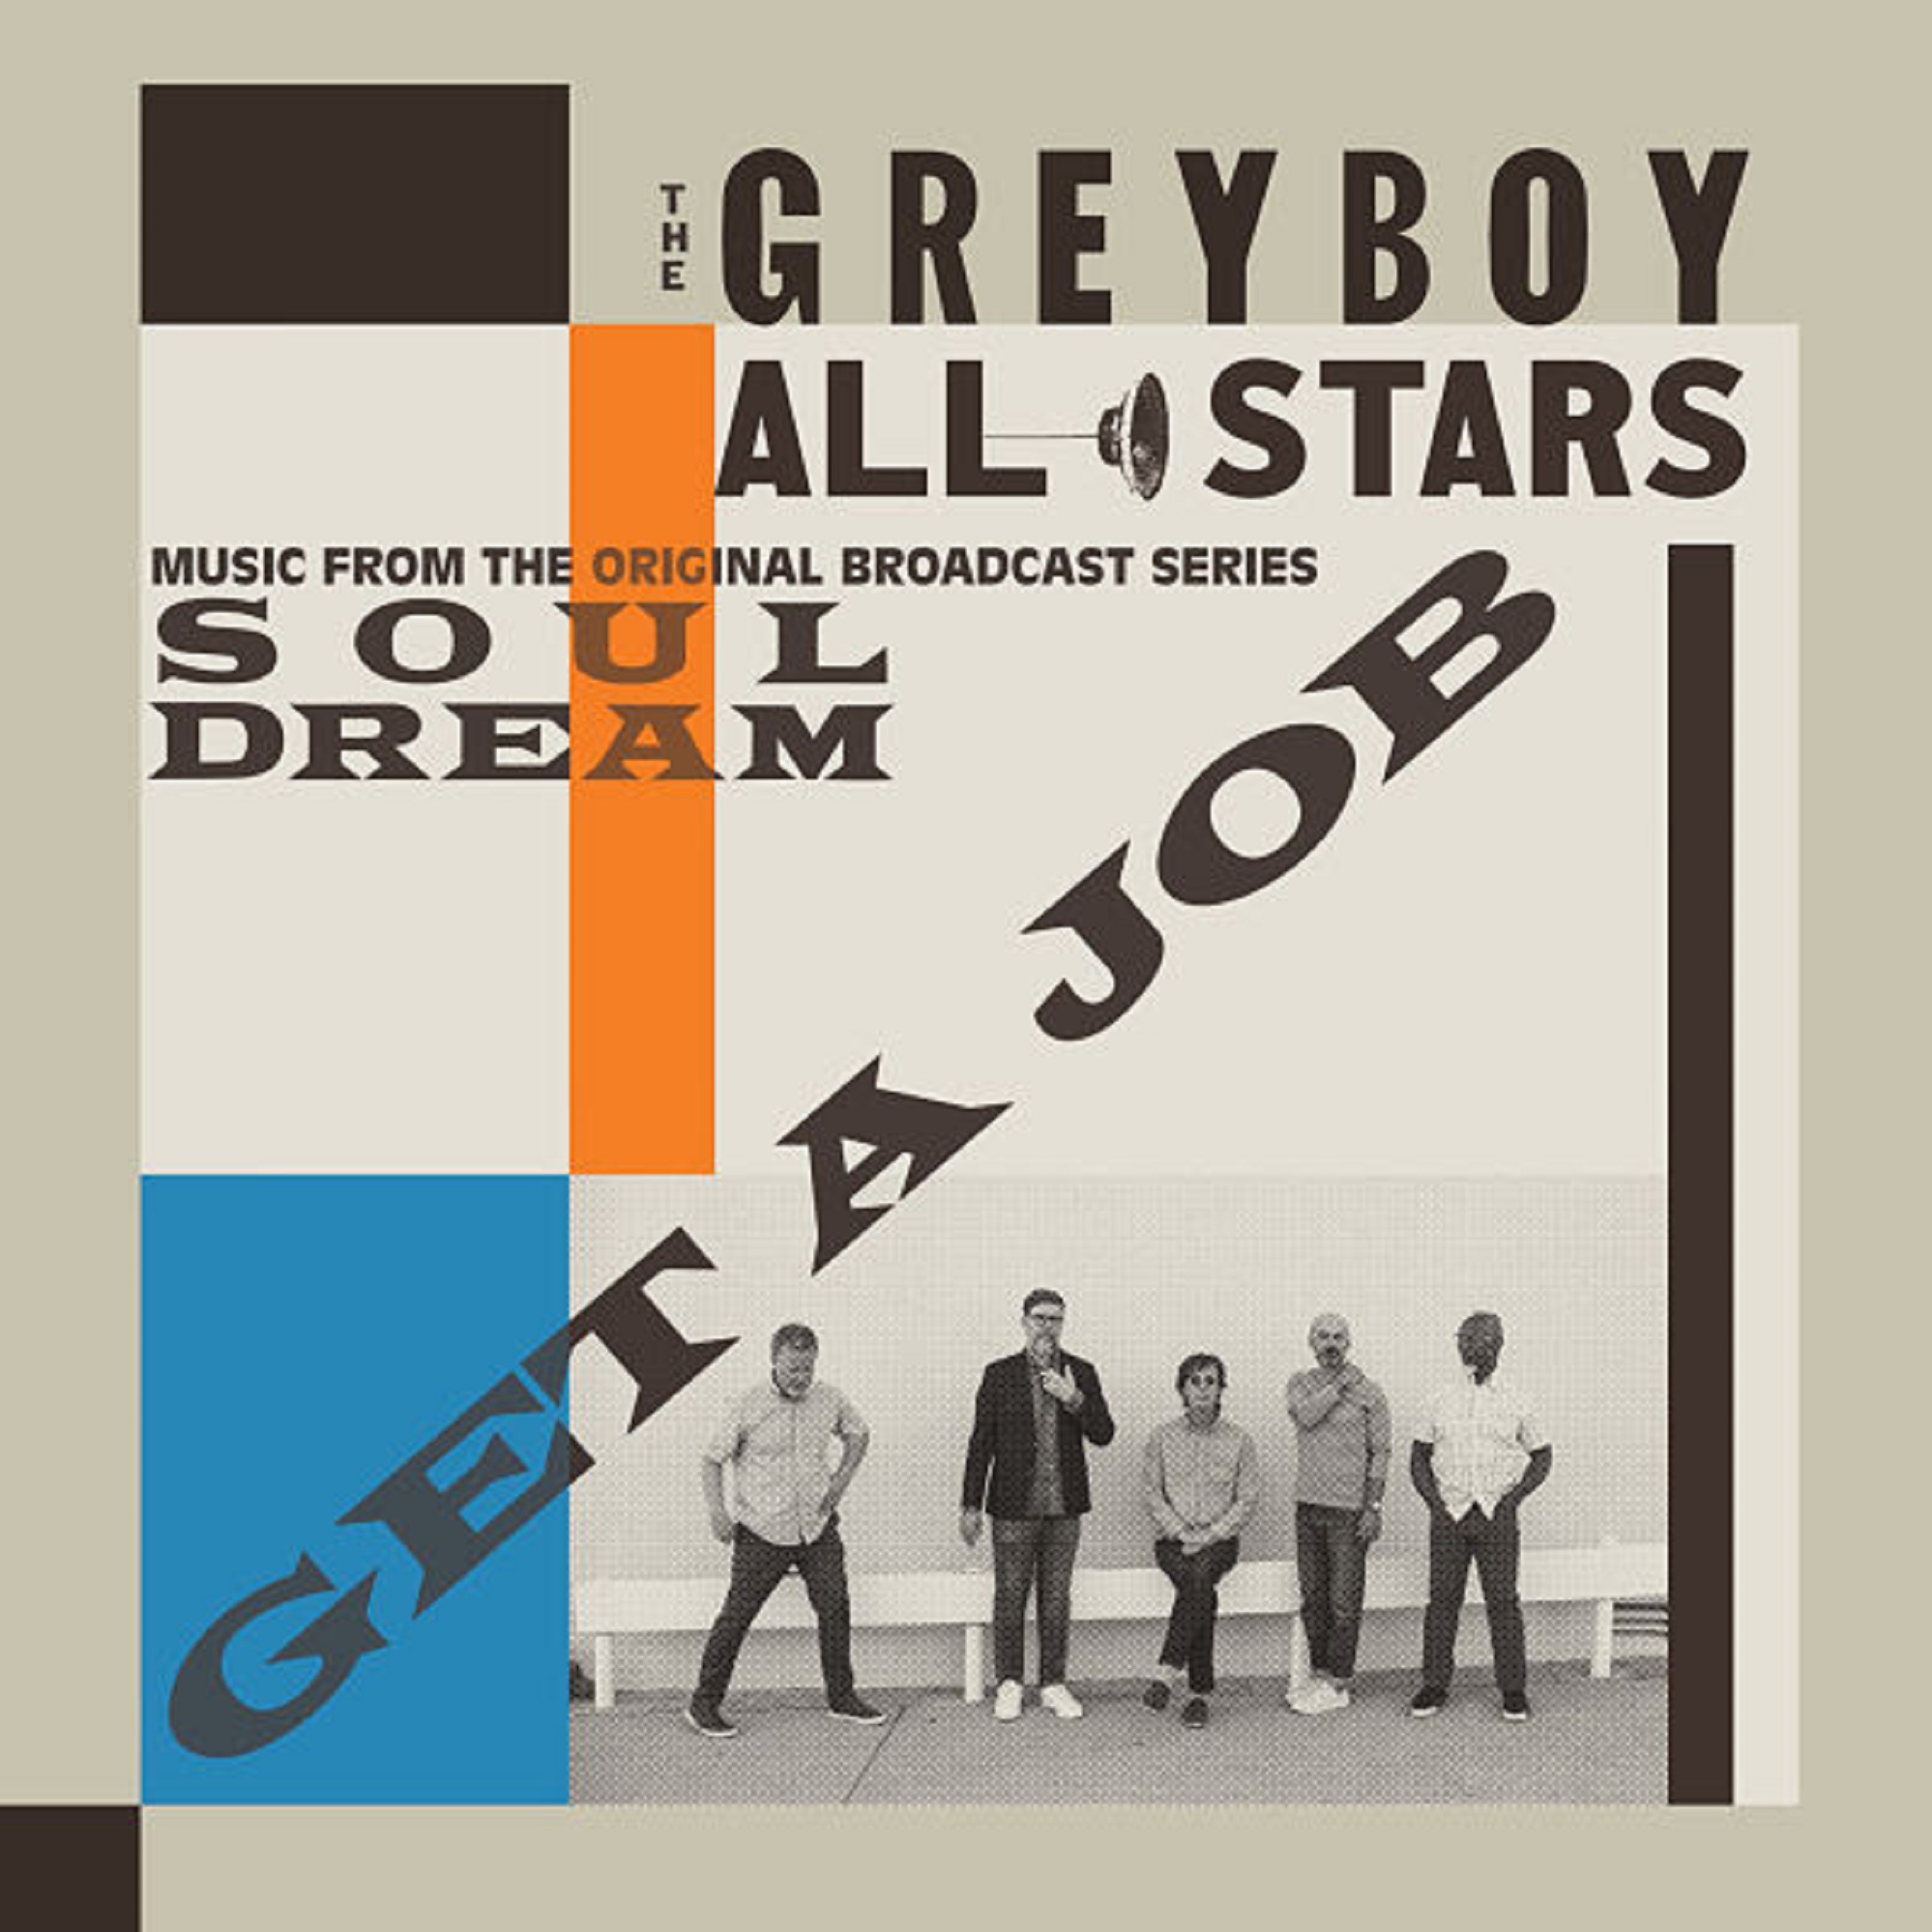 The Greyboy Allstars Release "Got To Get Me A Job" Video | New LP Out This Friday